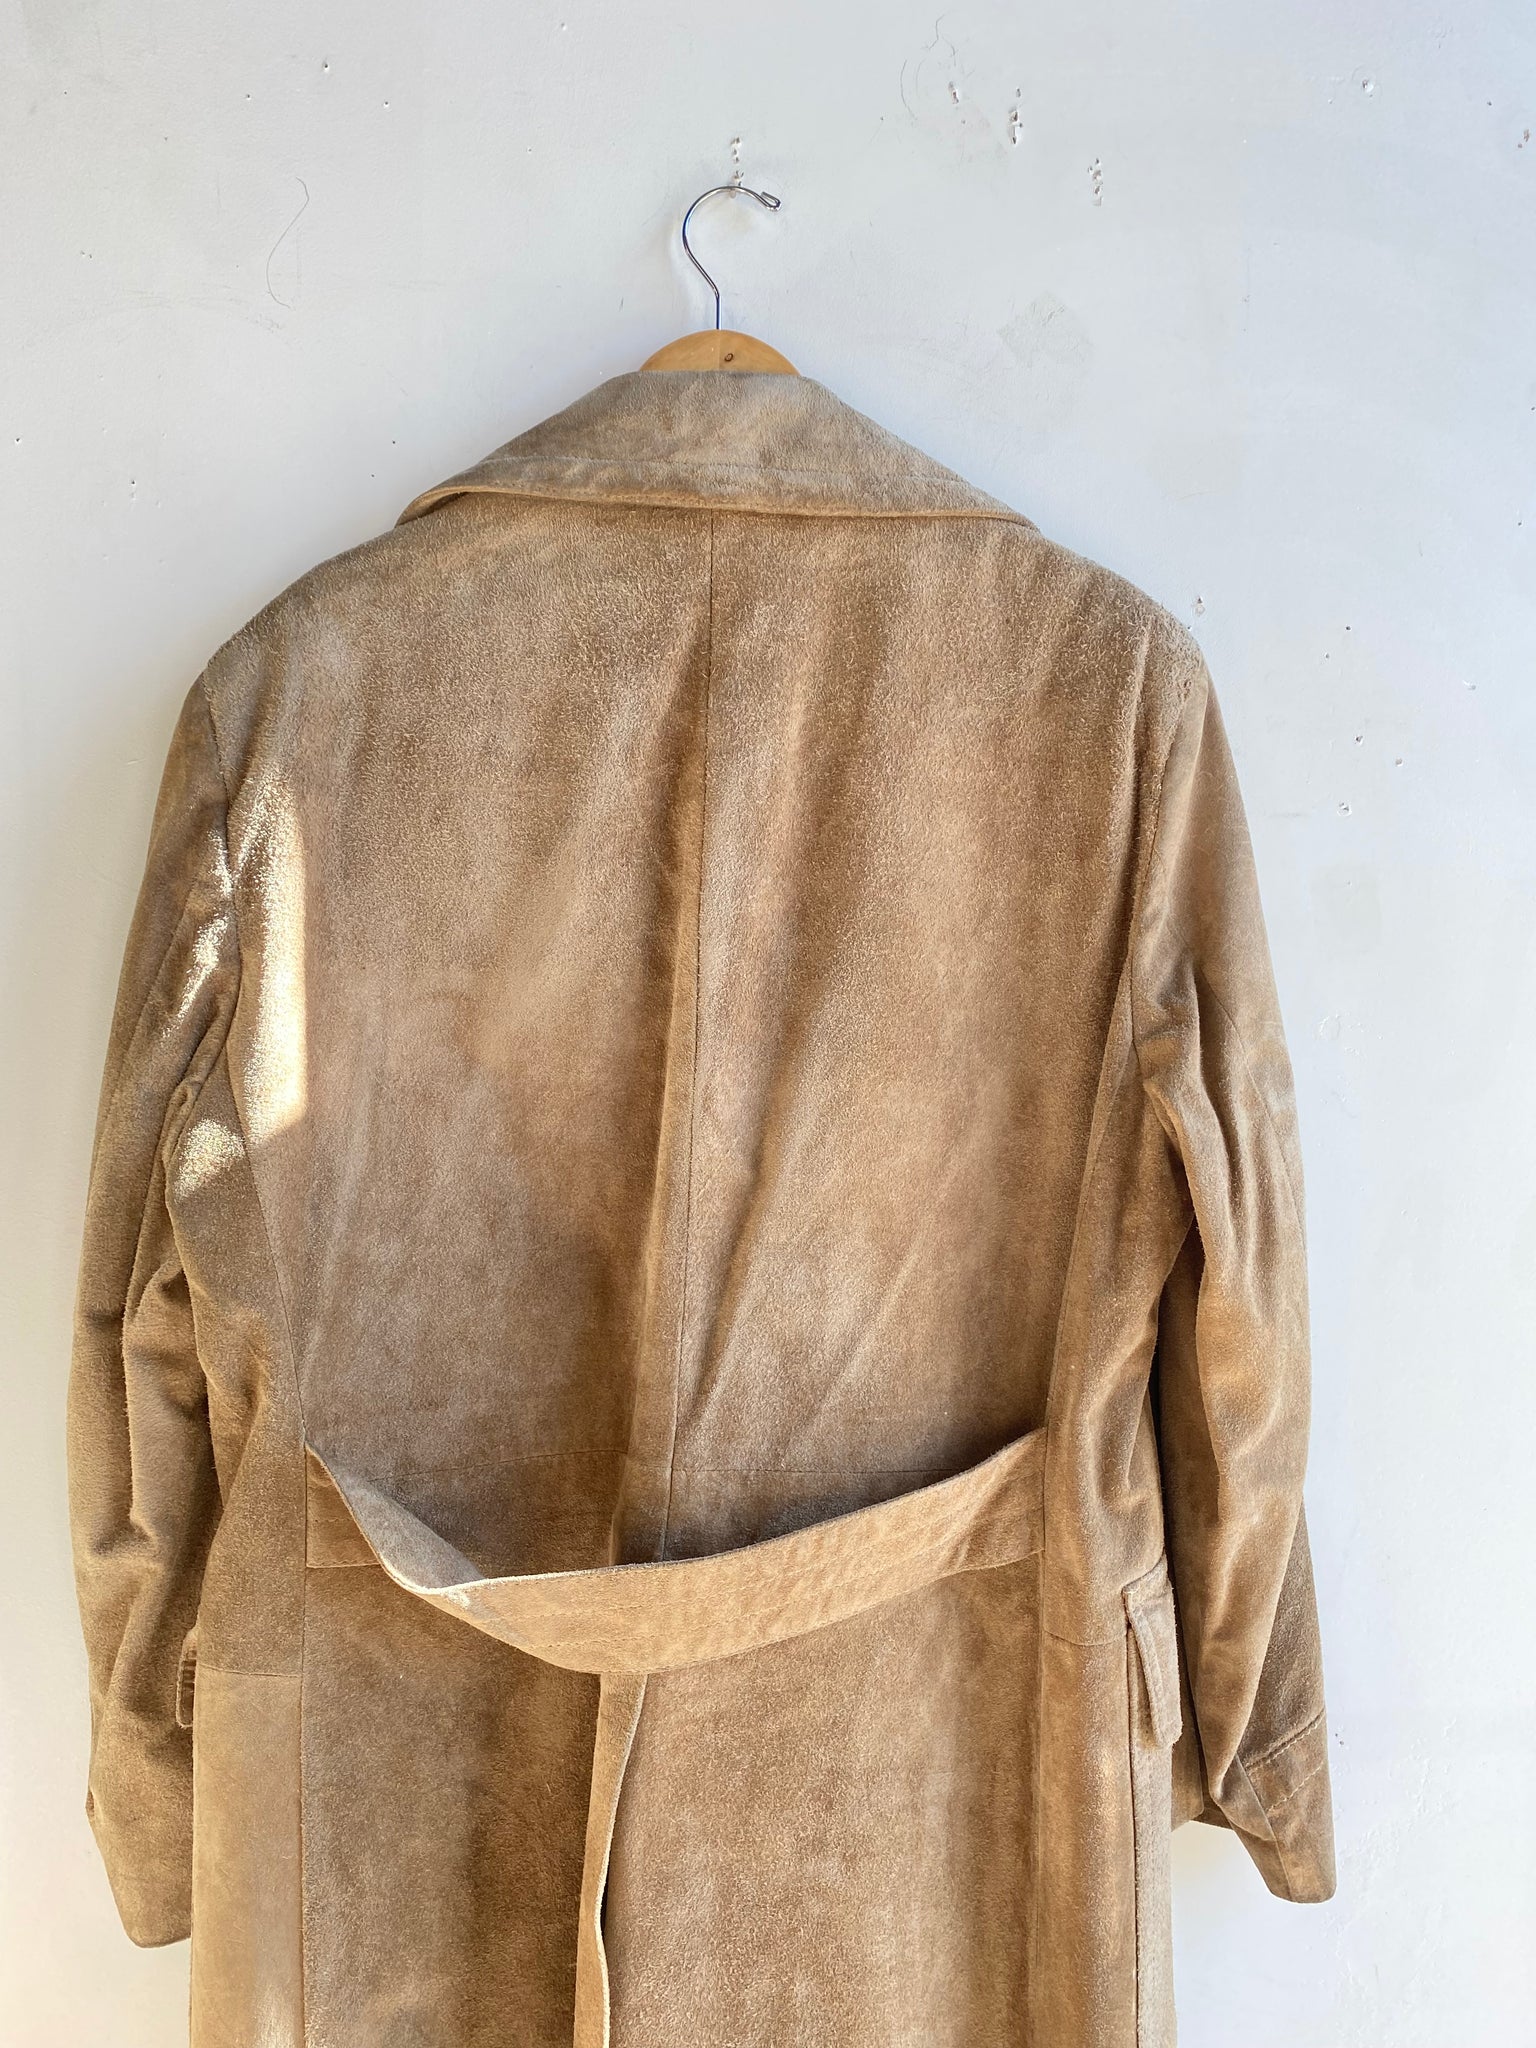 70s Tan Suede Leather Trench Coat